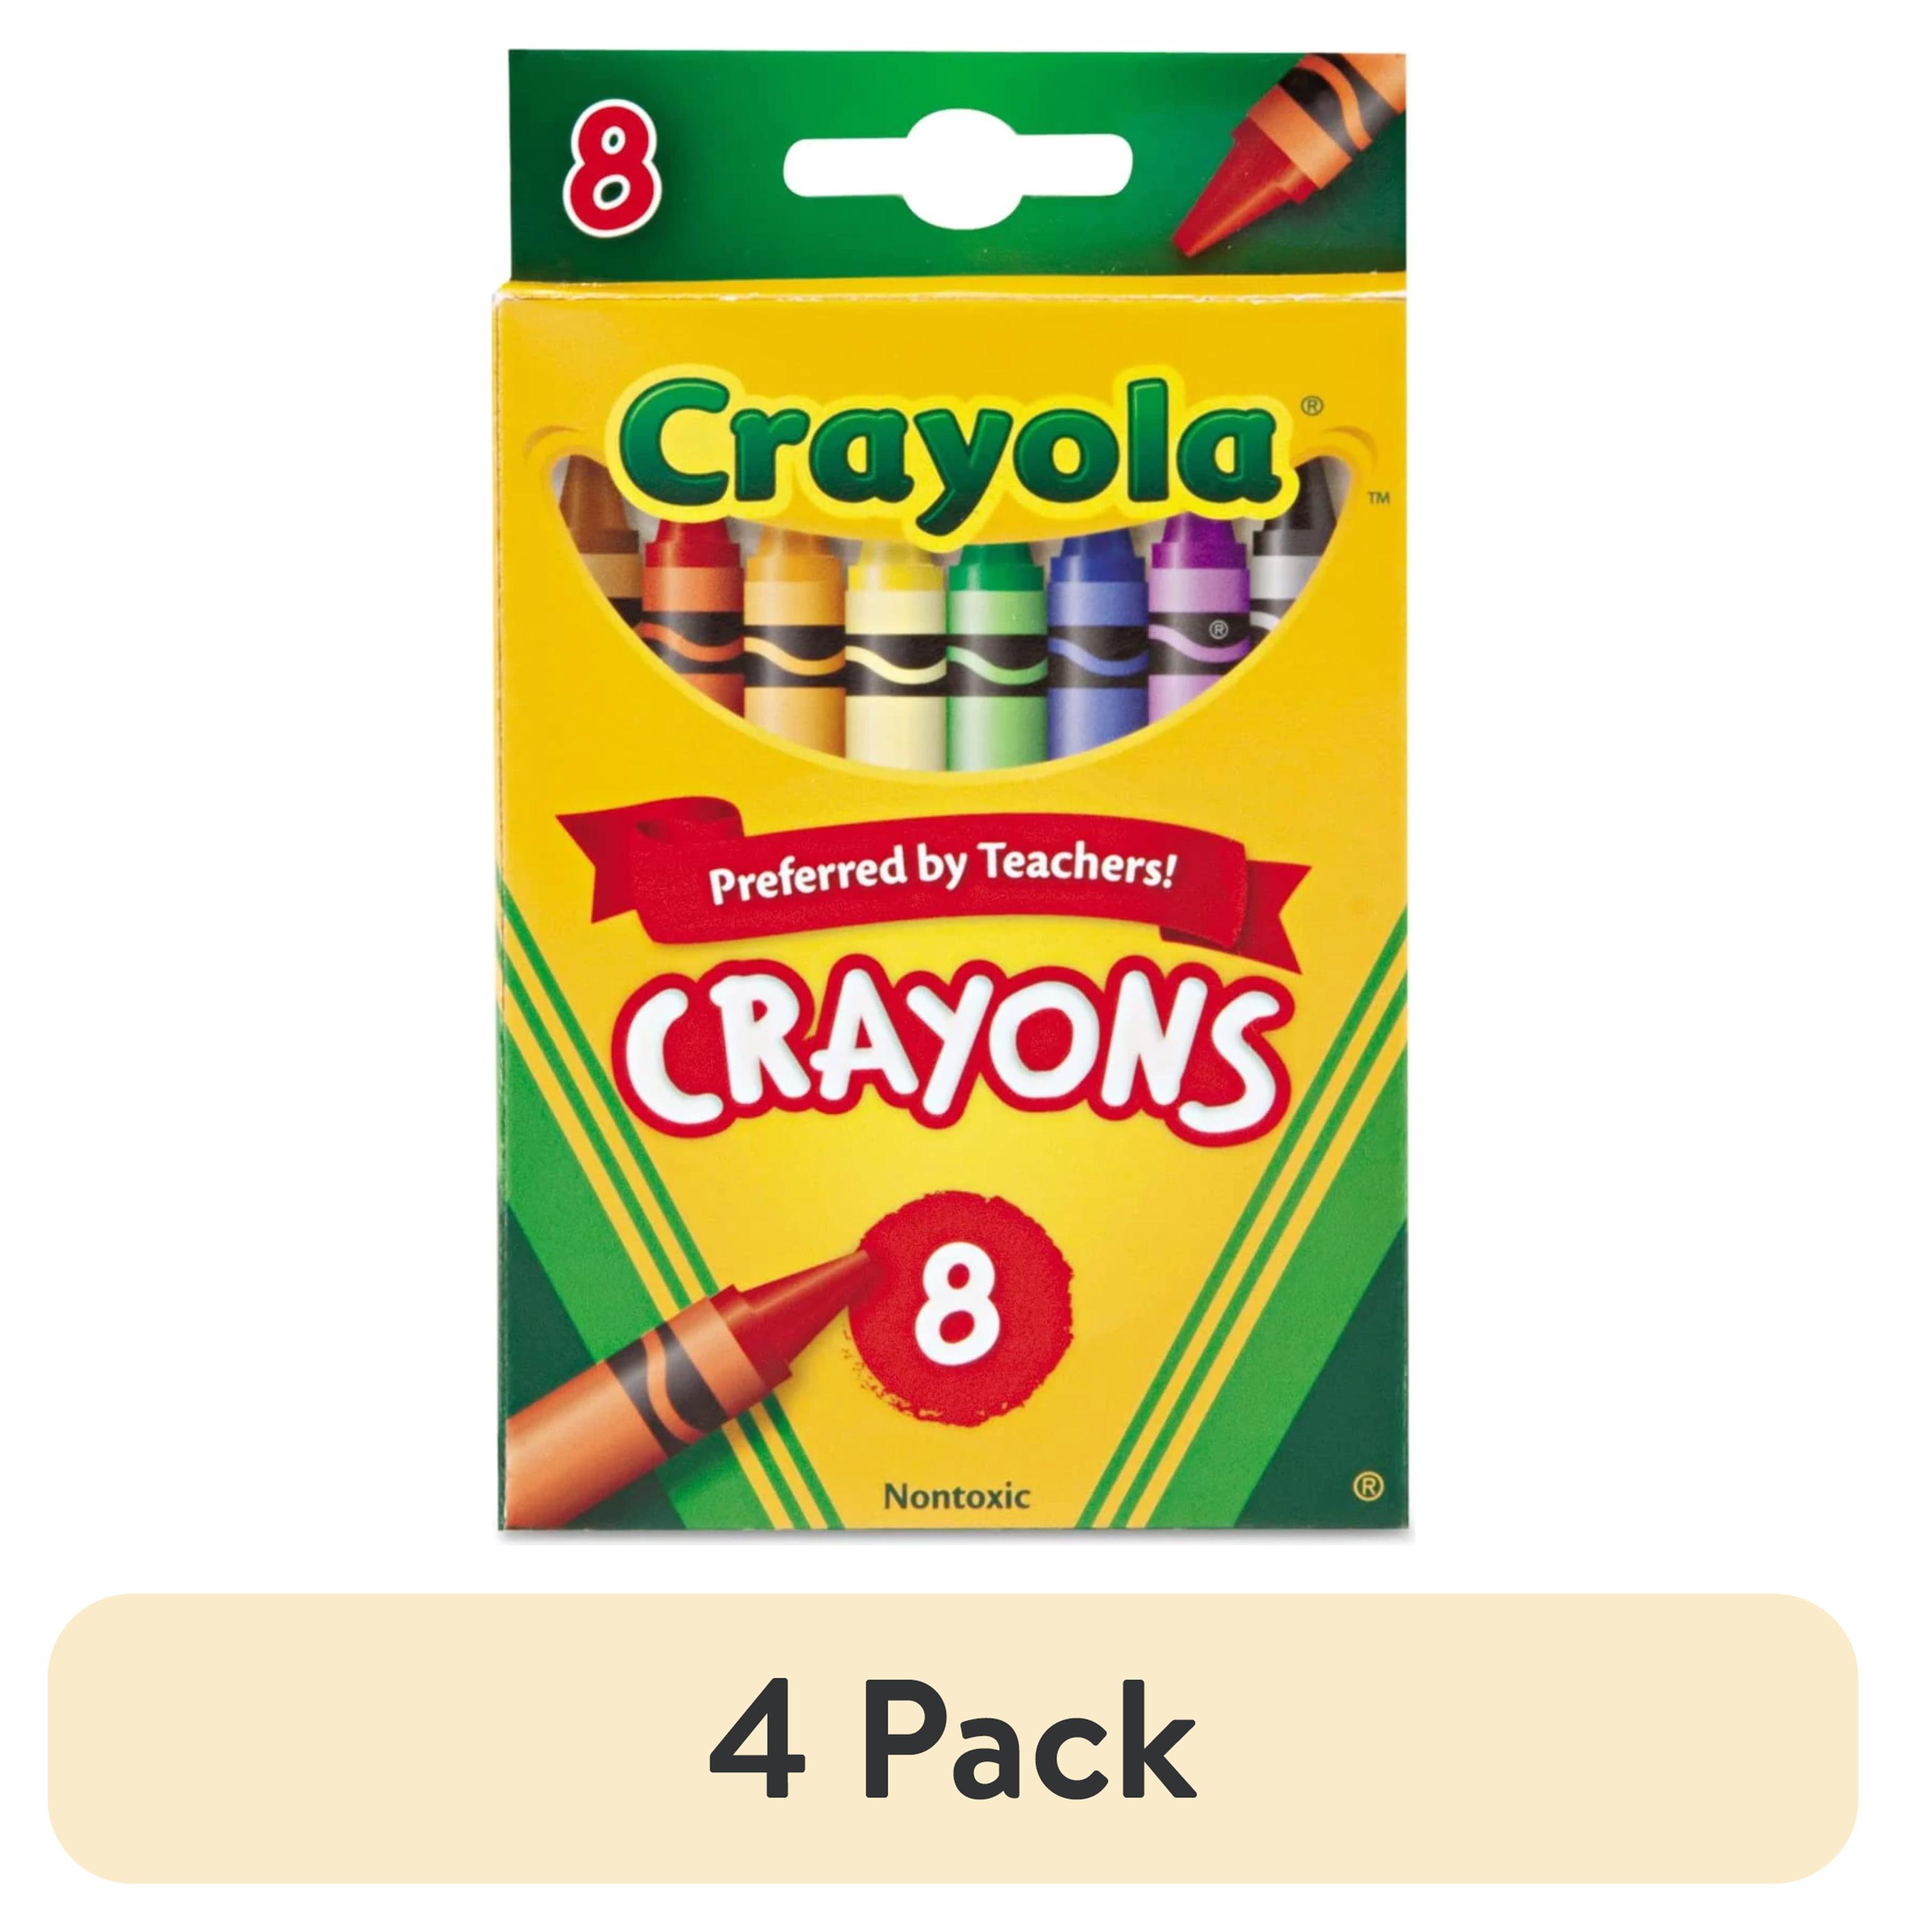 (4 pack) Crayola Classic Crayons, Back to School Supplies for Kids, 8 Ct, Art Supplies - image 1 of 7